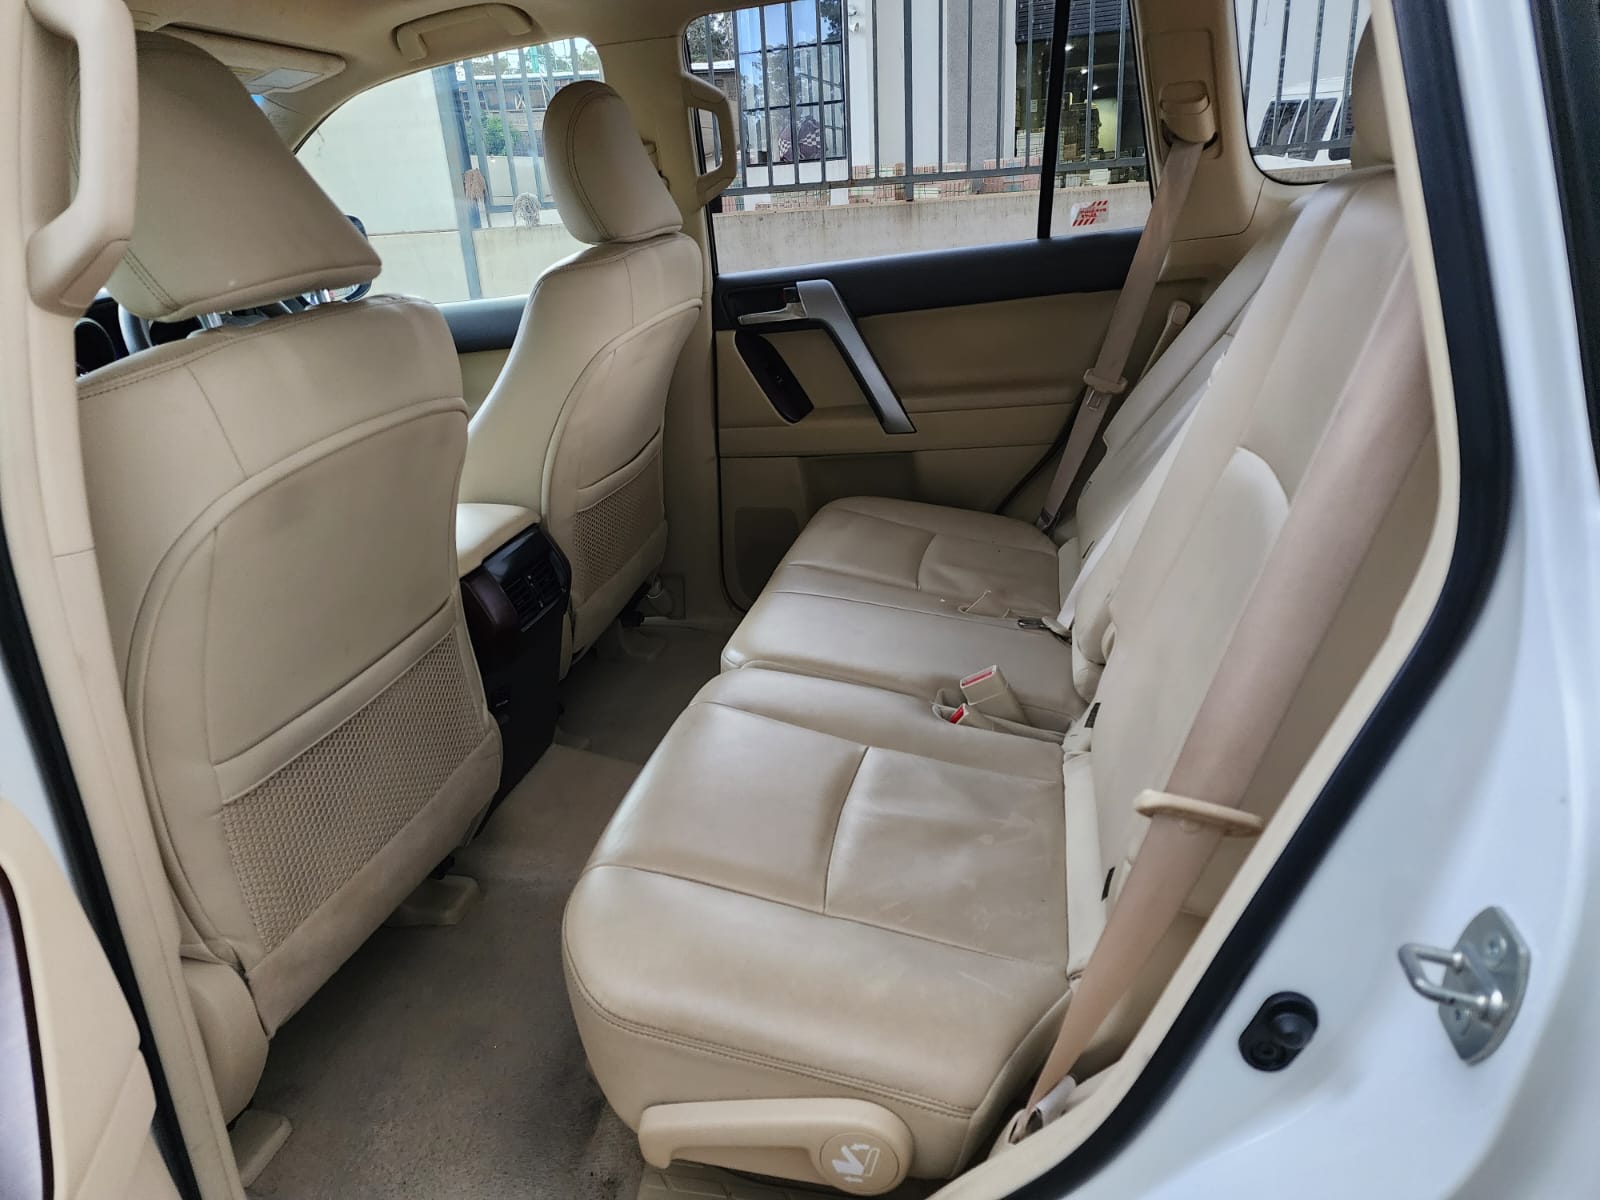 Toyota Prado j150 Just ARRIVED with SUNROOF LEATHER You Pay 30% Deposit Trade in OK